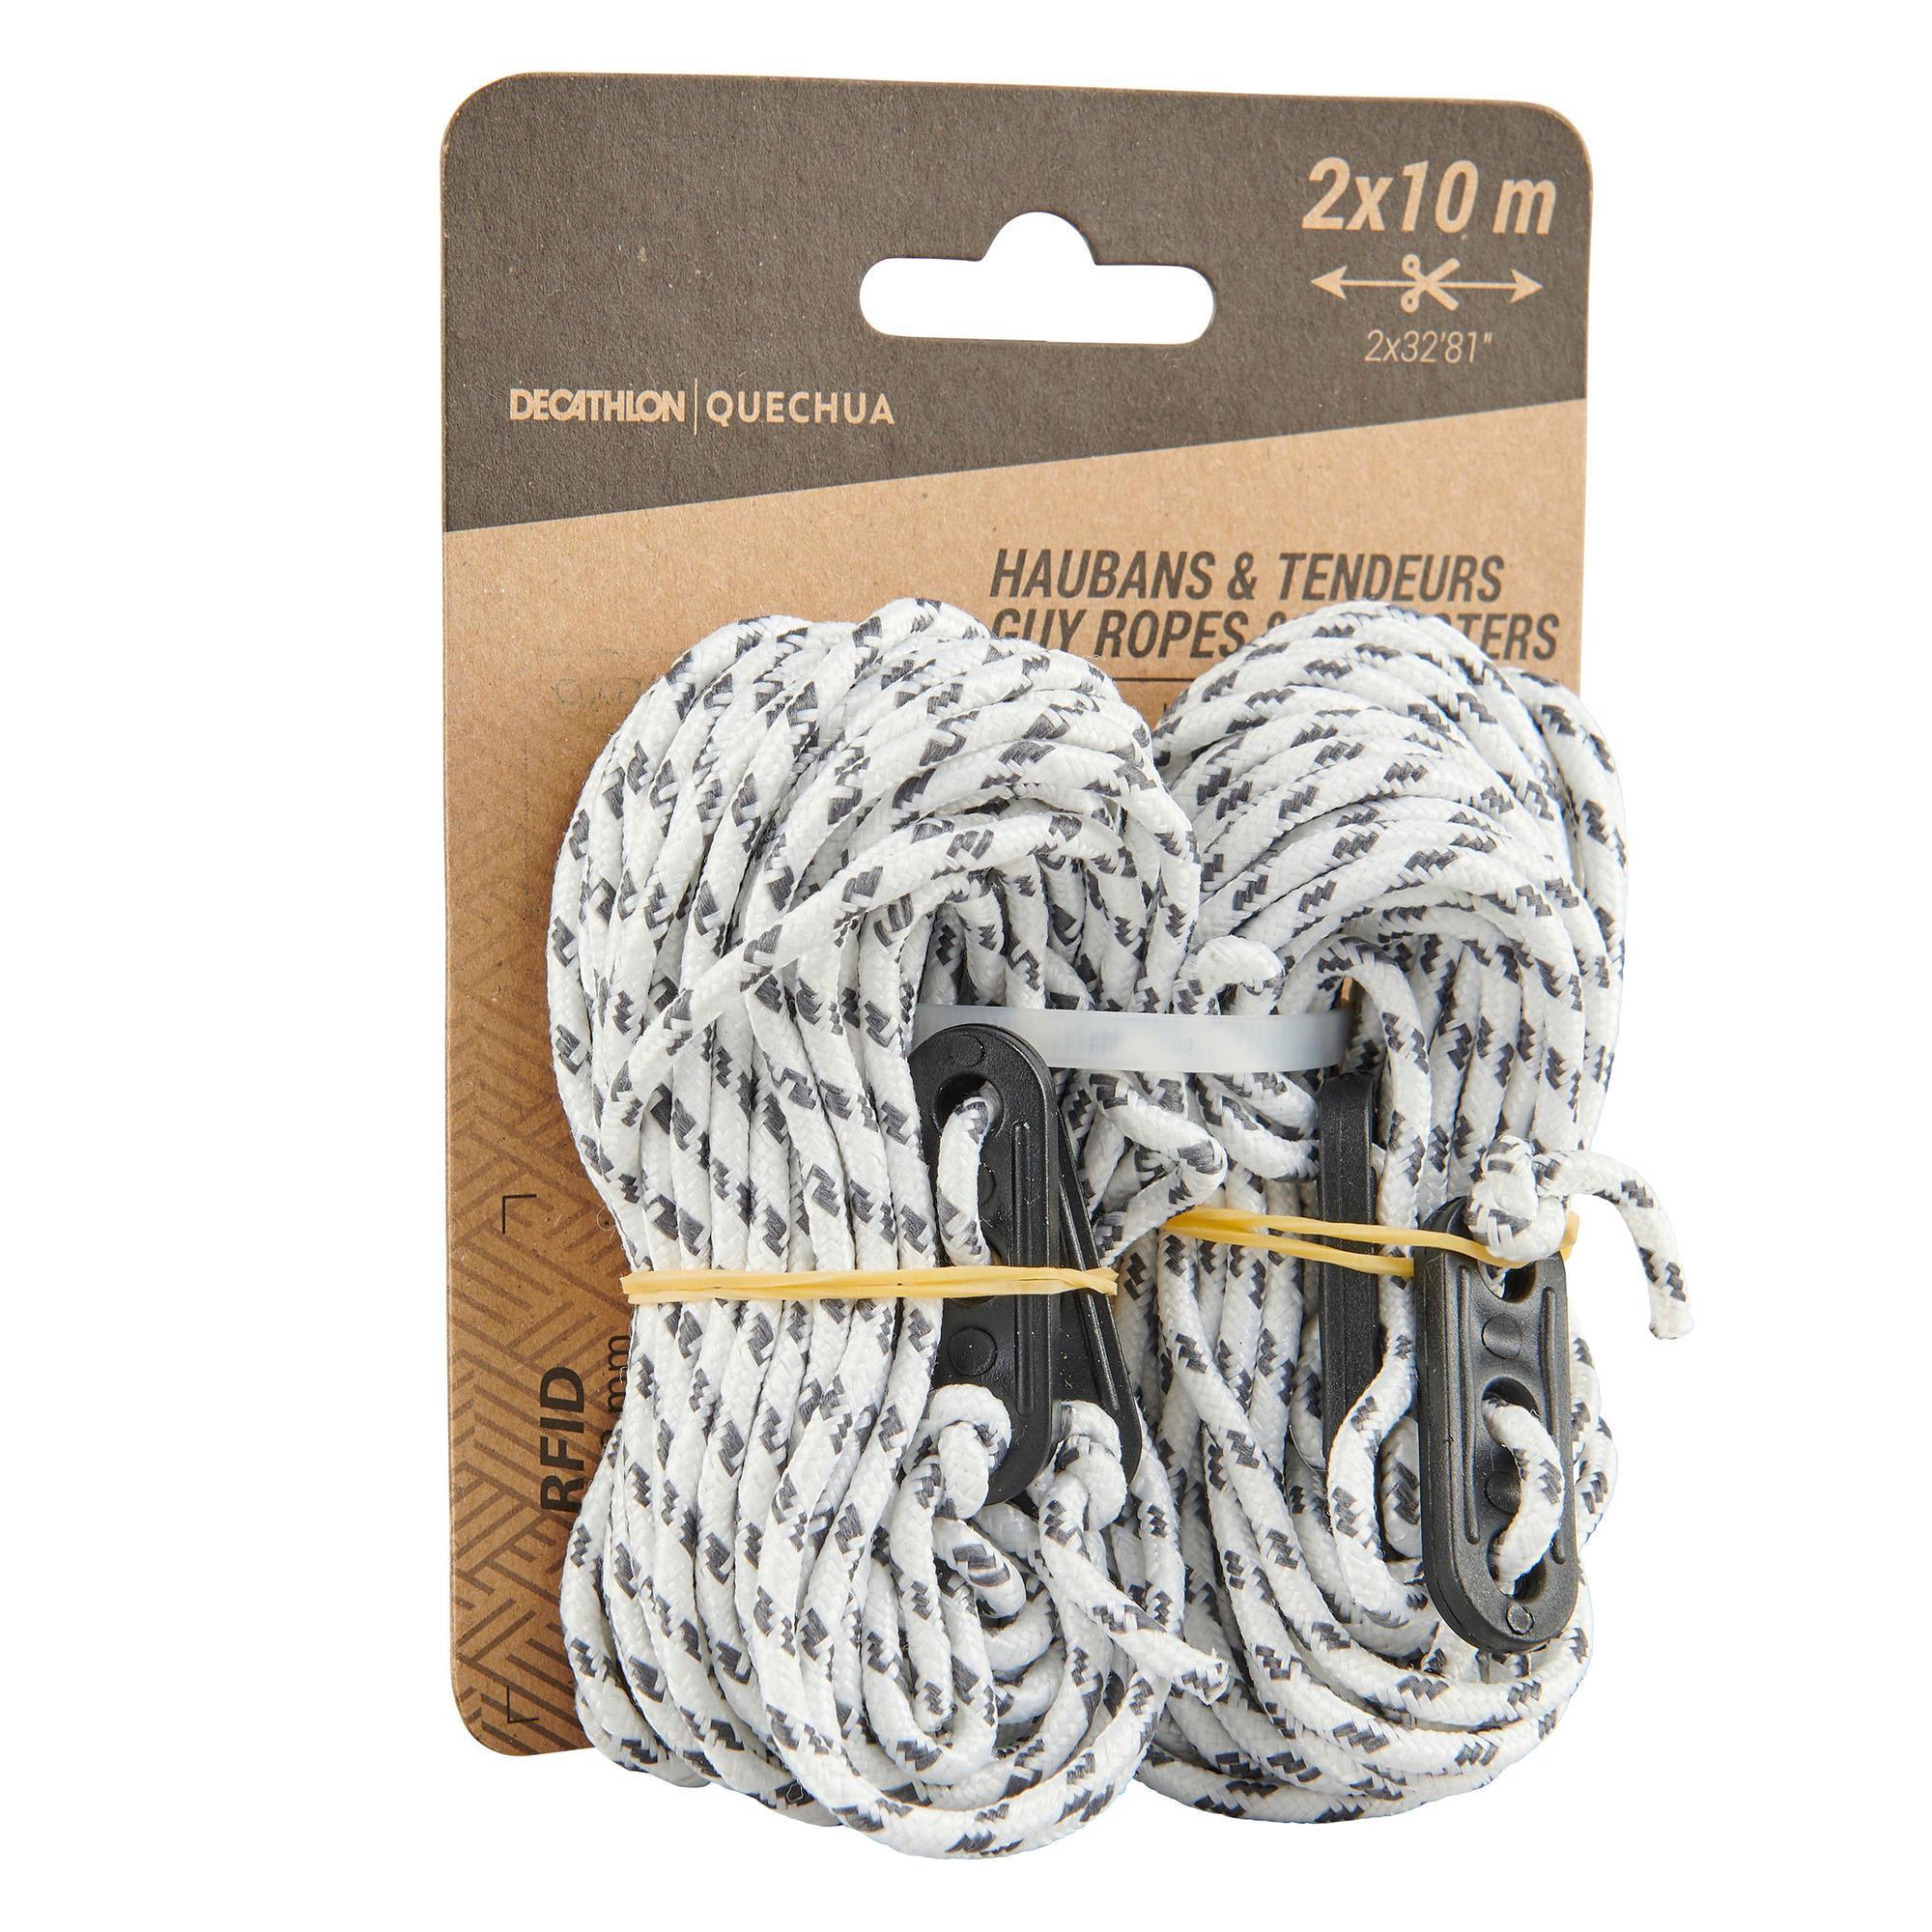 NEW X4 WHITE Guy Line Ropes 3 Metre SKU002 Tent Camping rope 